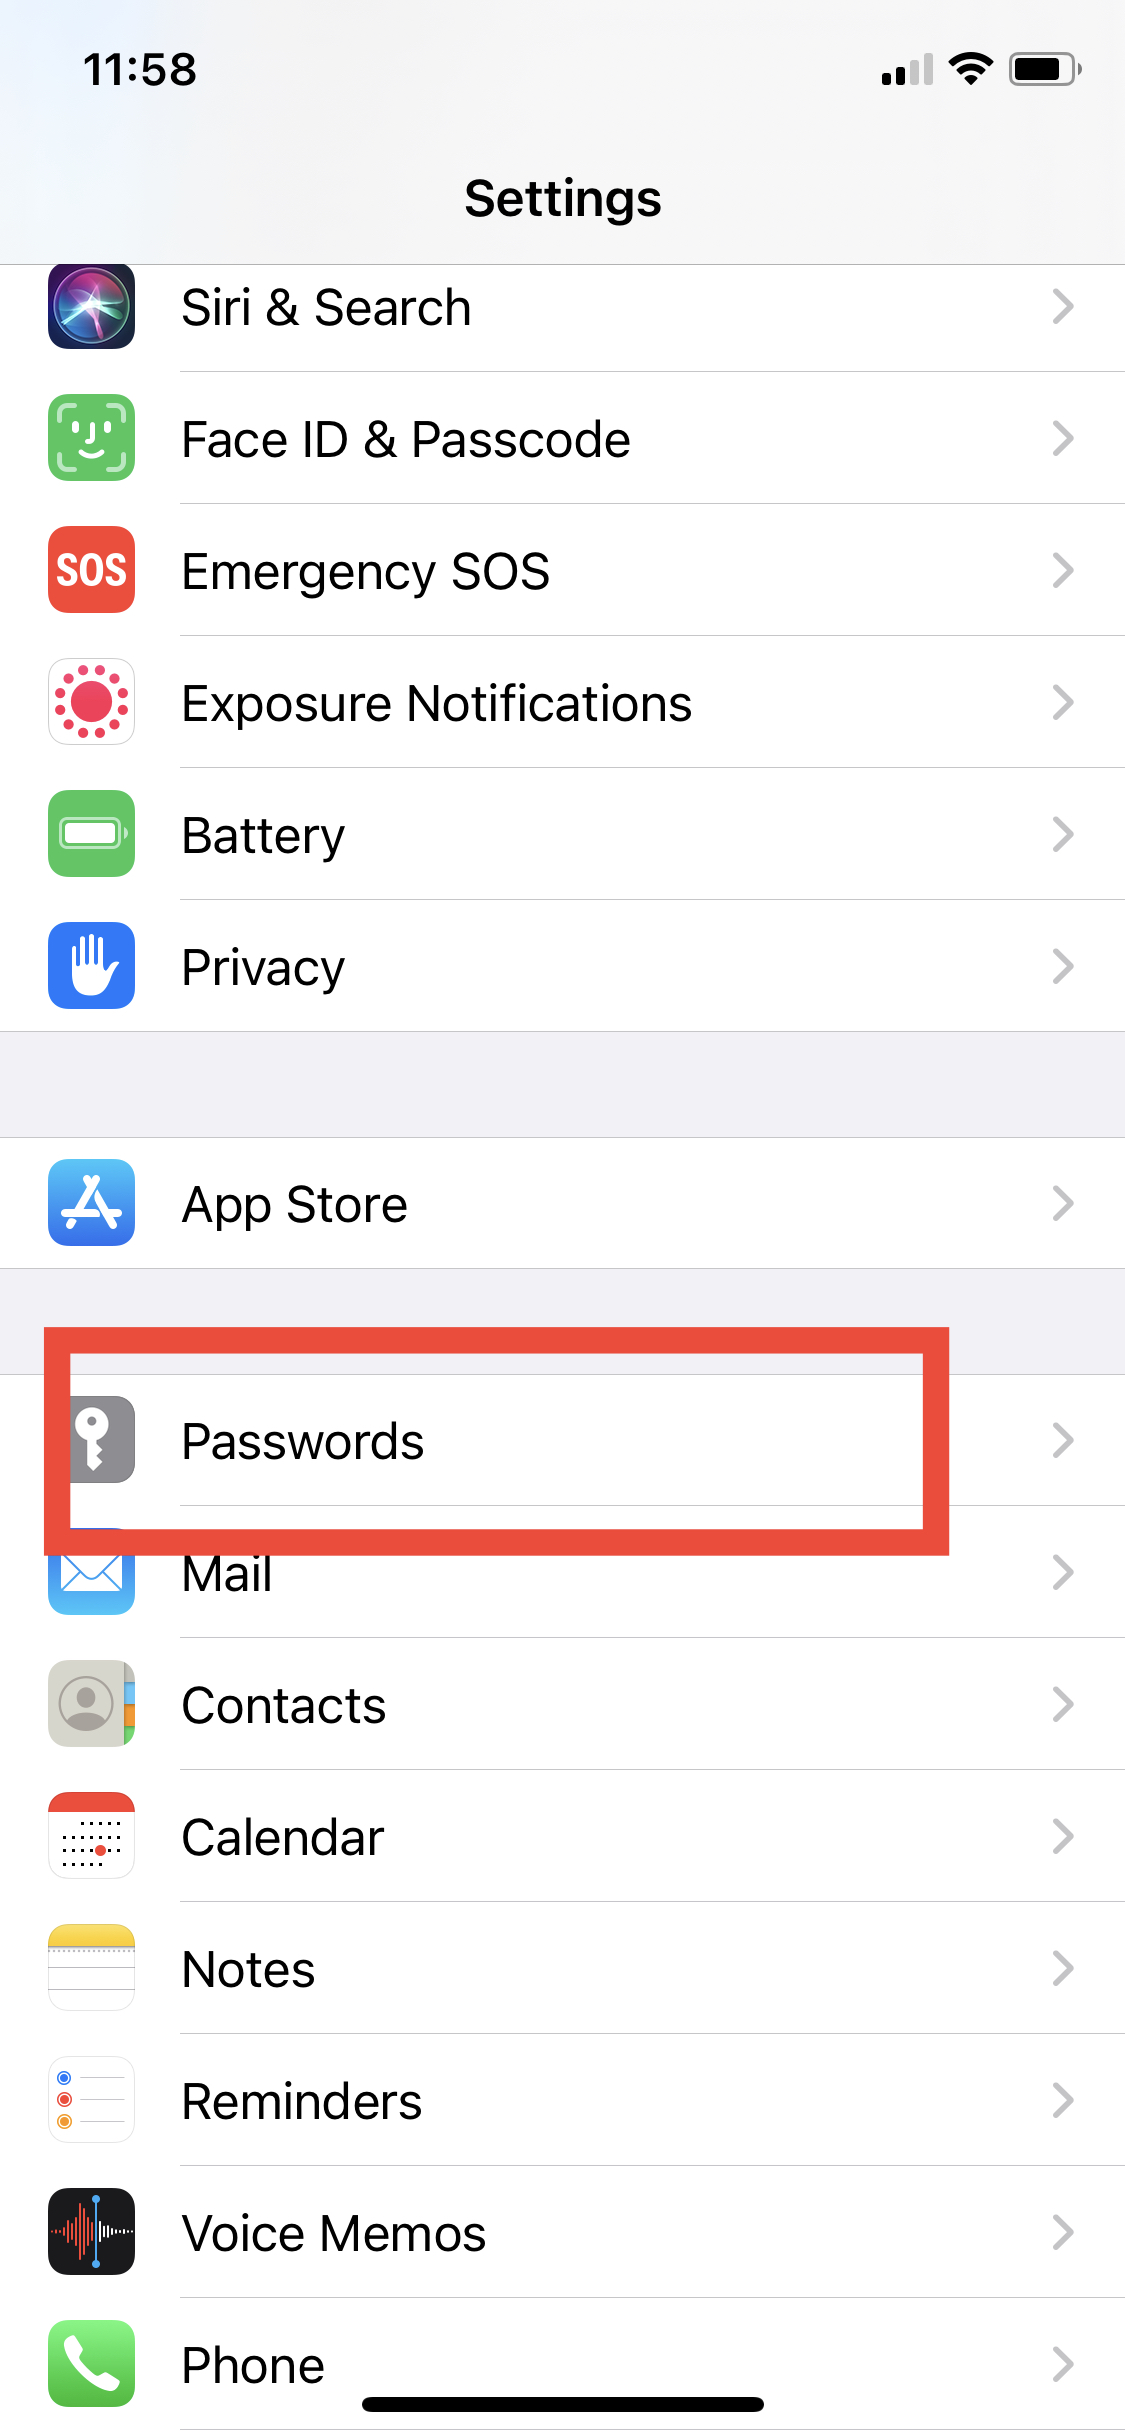 view compromised passwords iphone